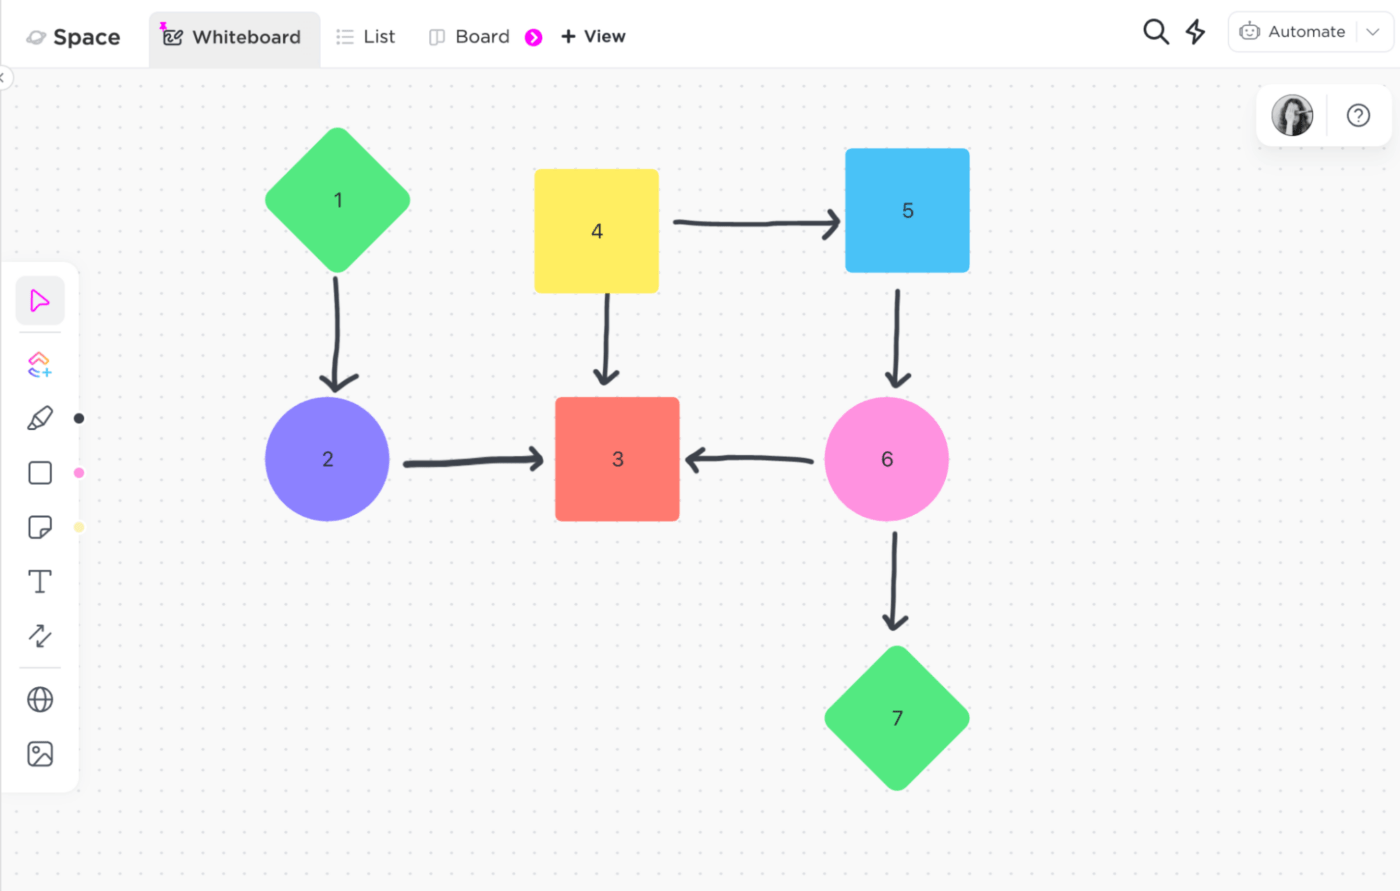 Process workflow diagram on ClickUp's Whiteboard